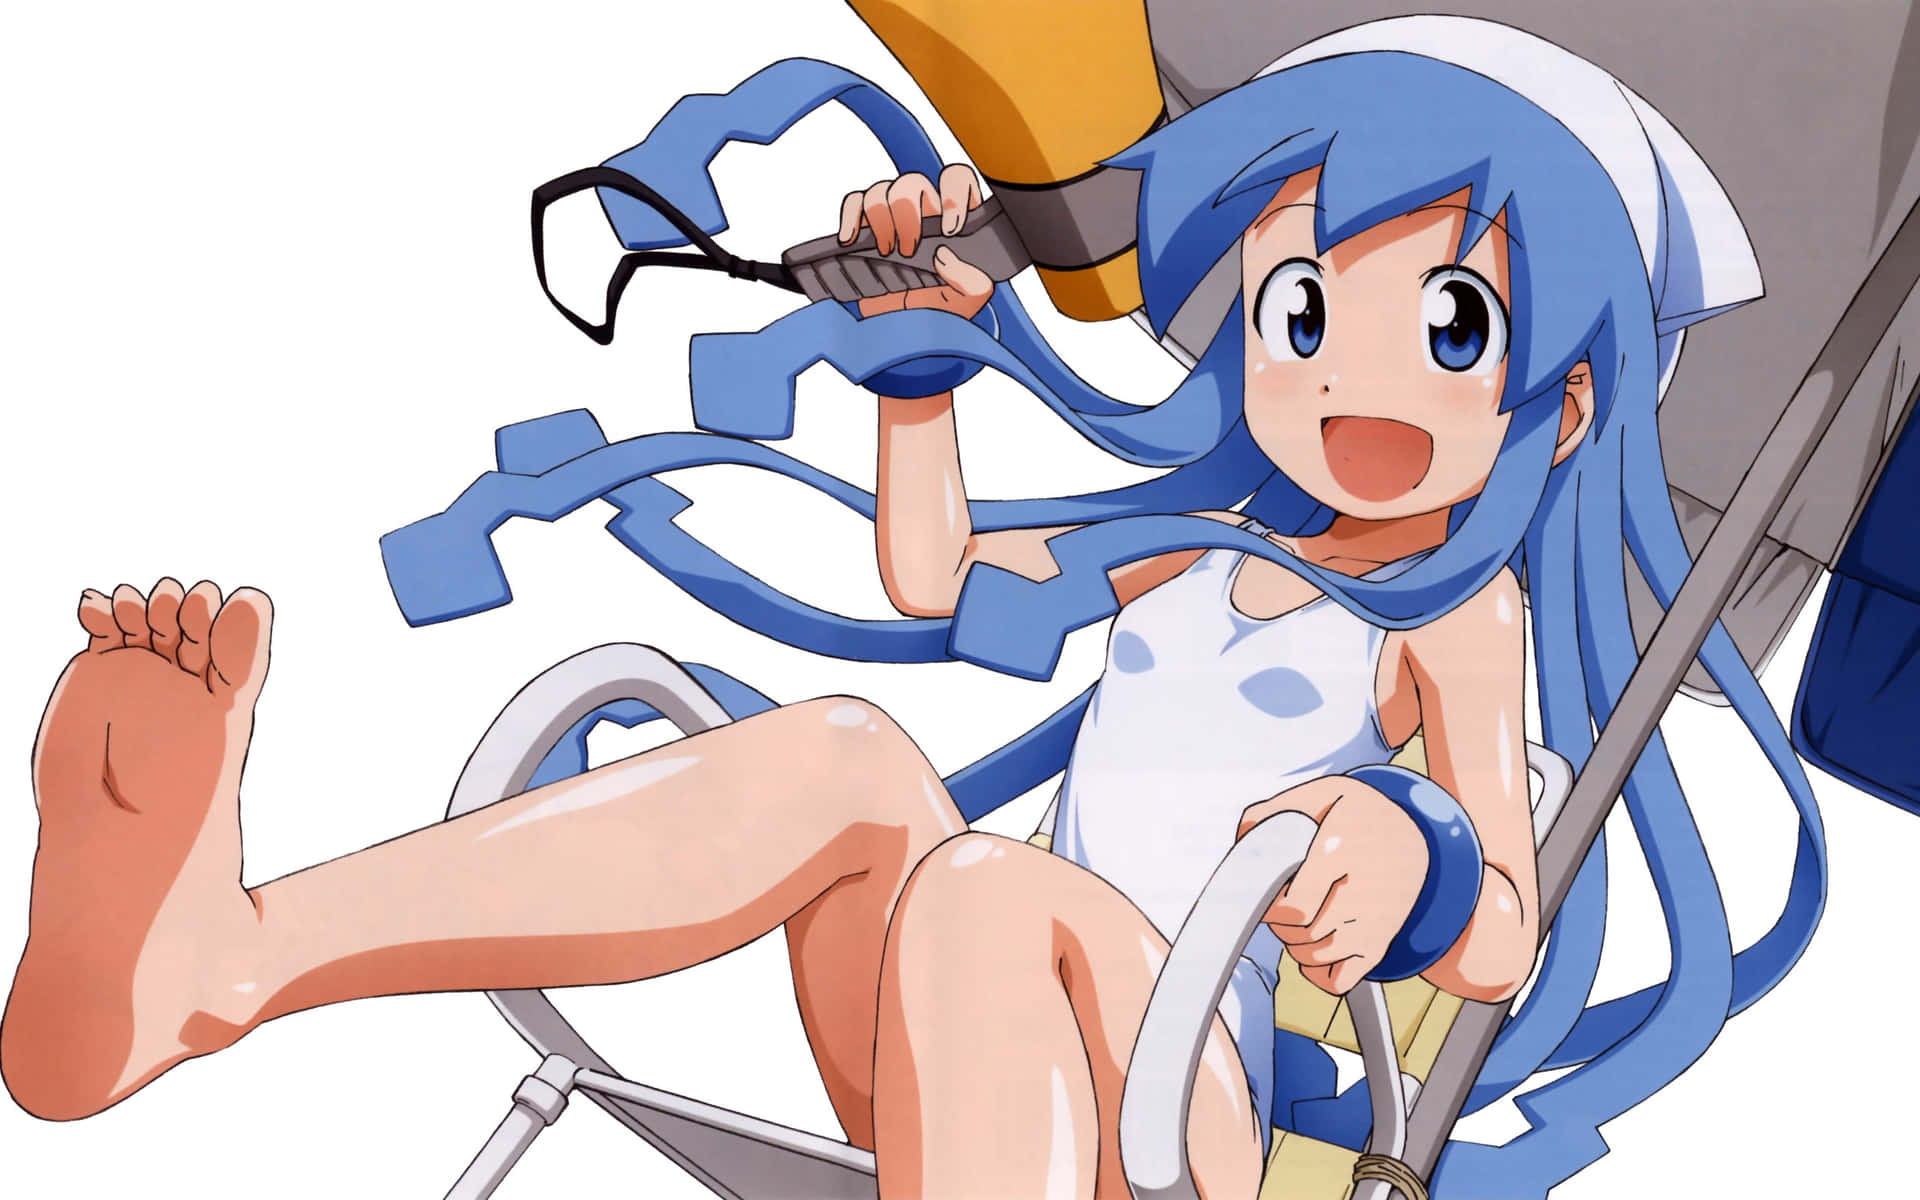 myReviewer.com - Review for The Squid Girl Complete Collection